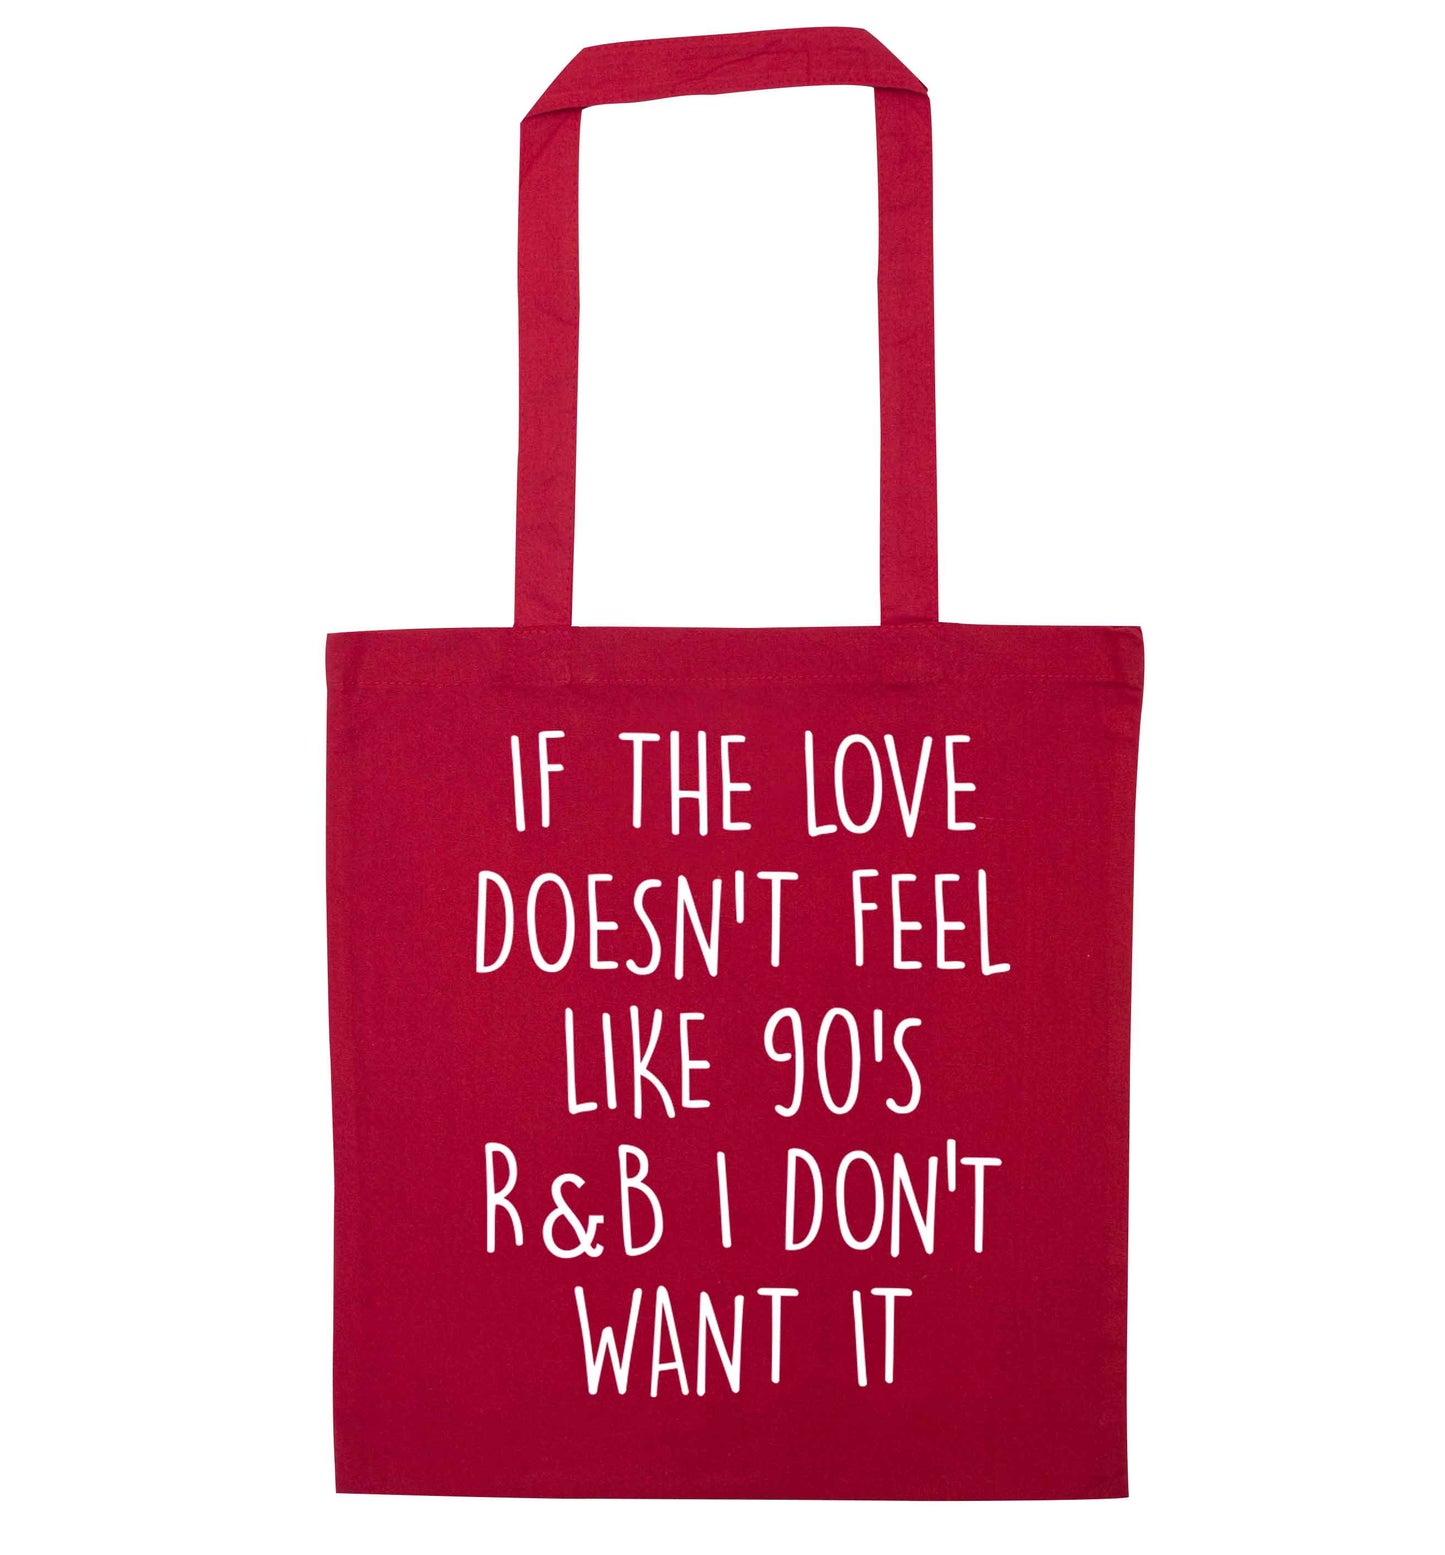 If the love doesn't feel like 90's r&b I don't want it red tote bag